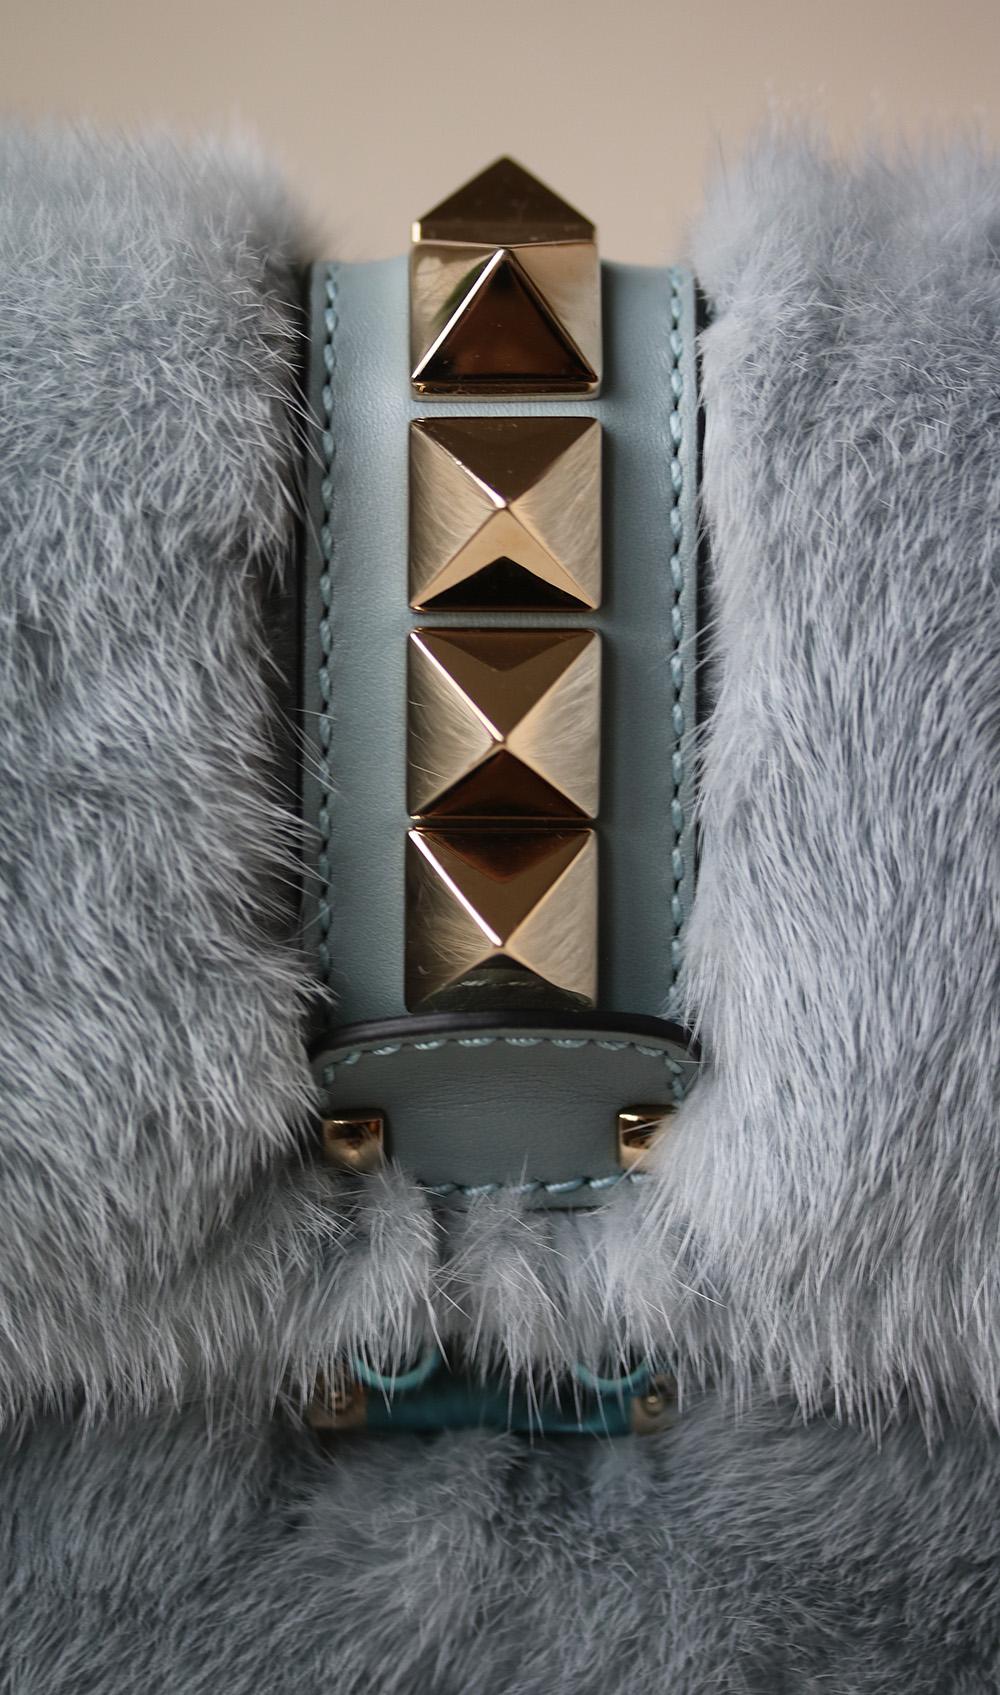 Valentino Garavani's Lock Small shoulder bag, a fan favourite, is back in a lush and dense mink fur design. The blue hue is complemented by blue leather trims and the iconic golden Rockstuds. Material: mink fur. Trim: leather, platinum-plated studs.